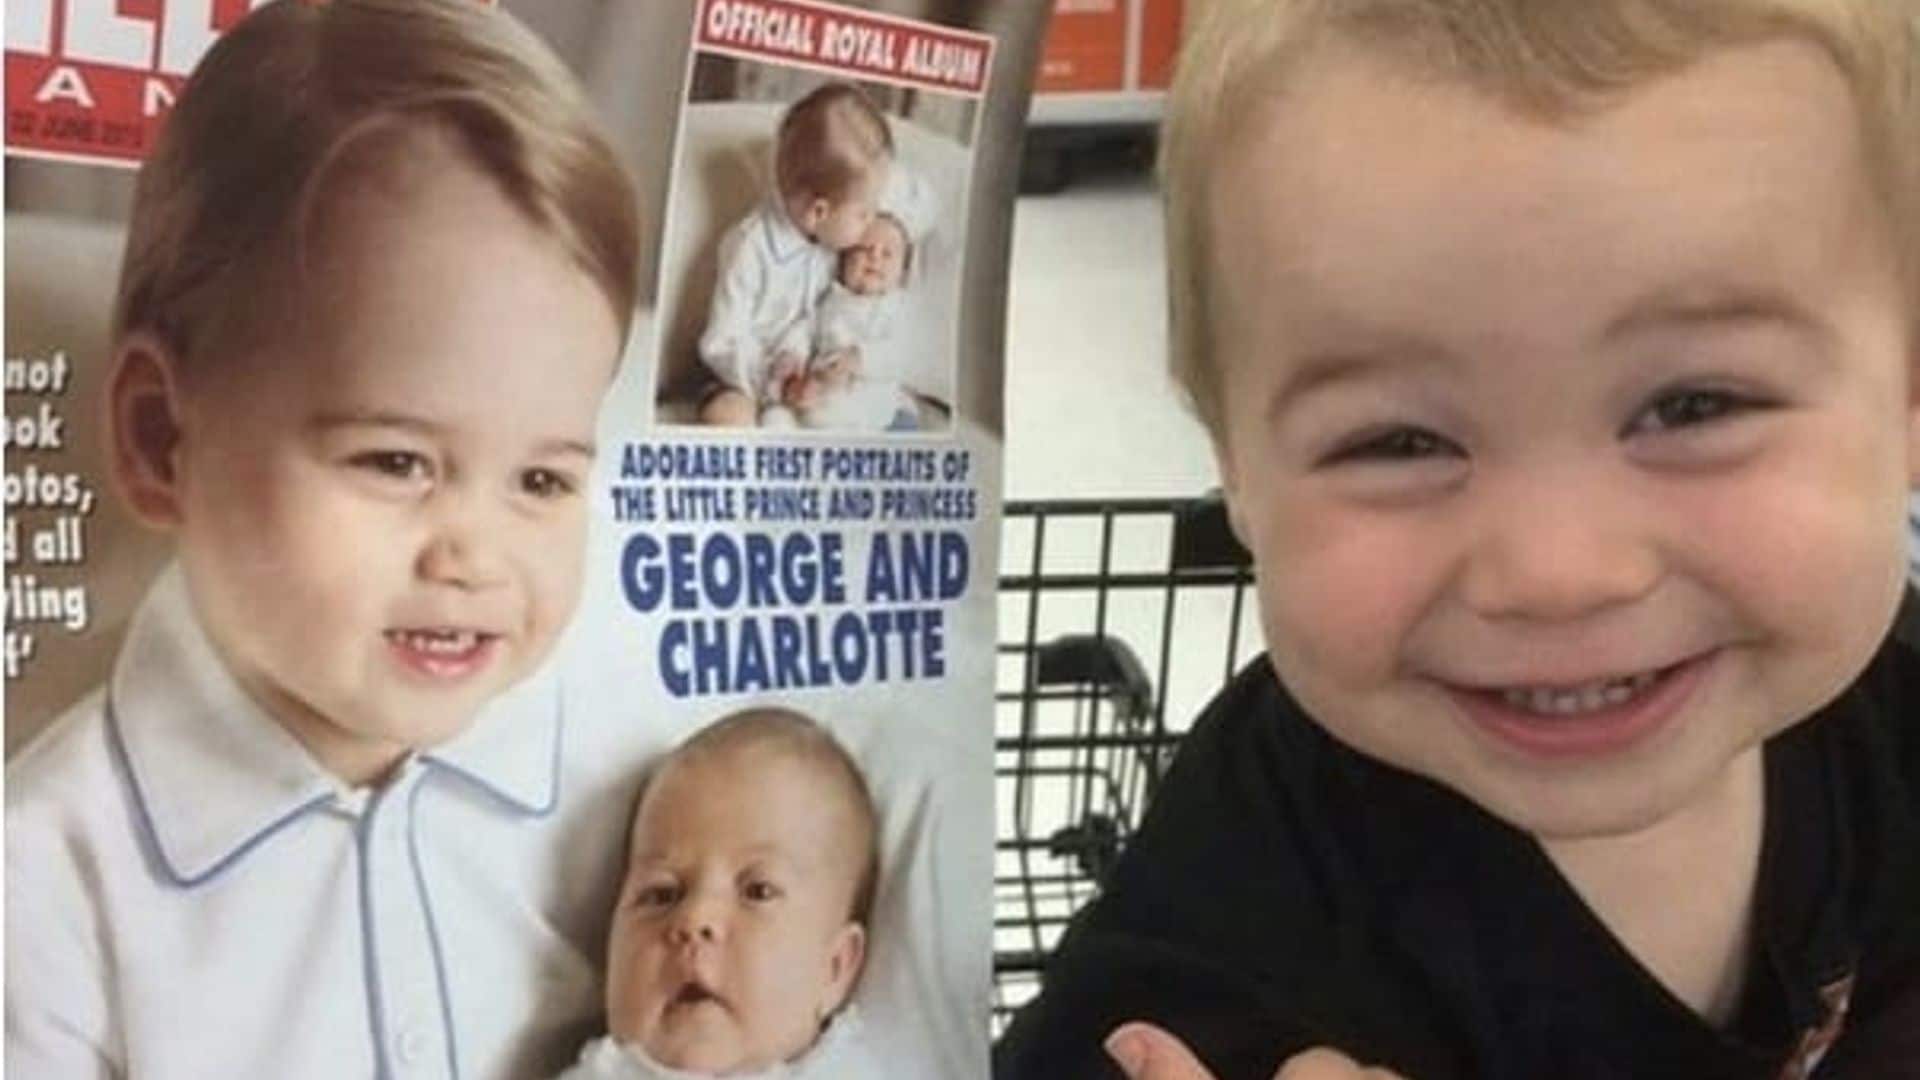 Prince George look-alike's parents react to their son's photo going viral